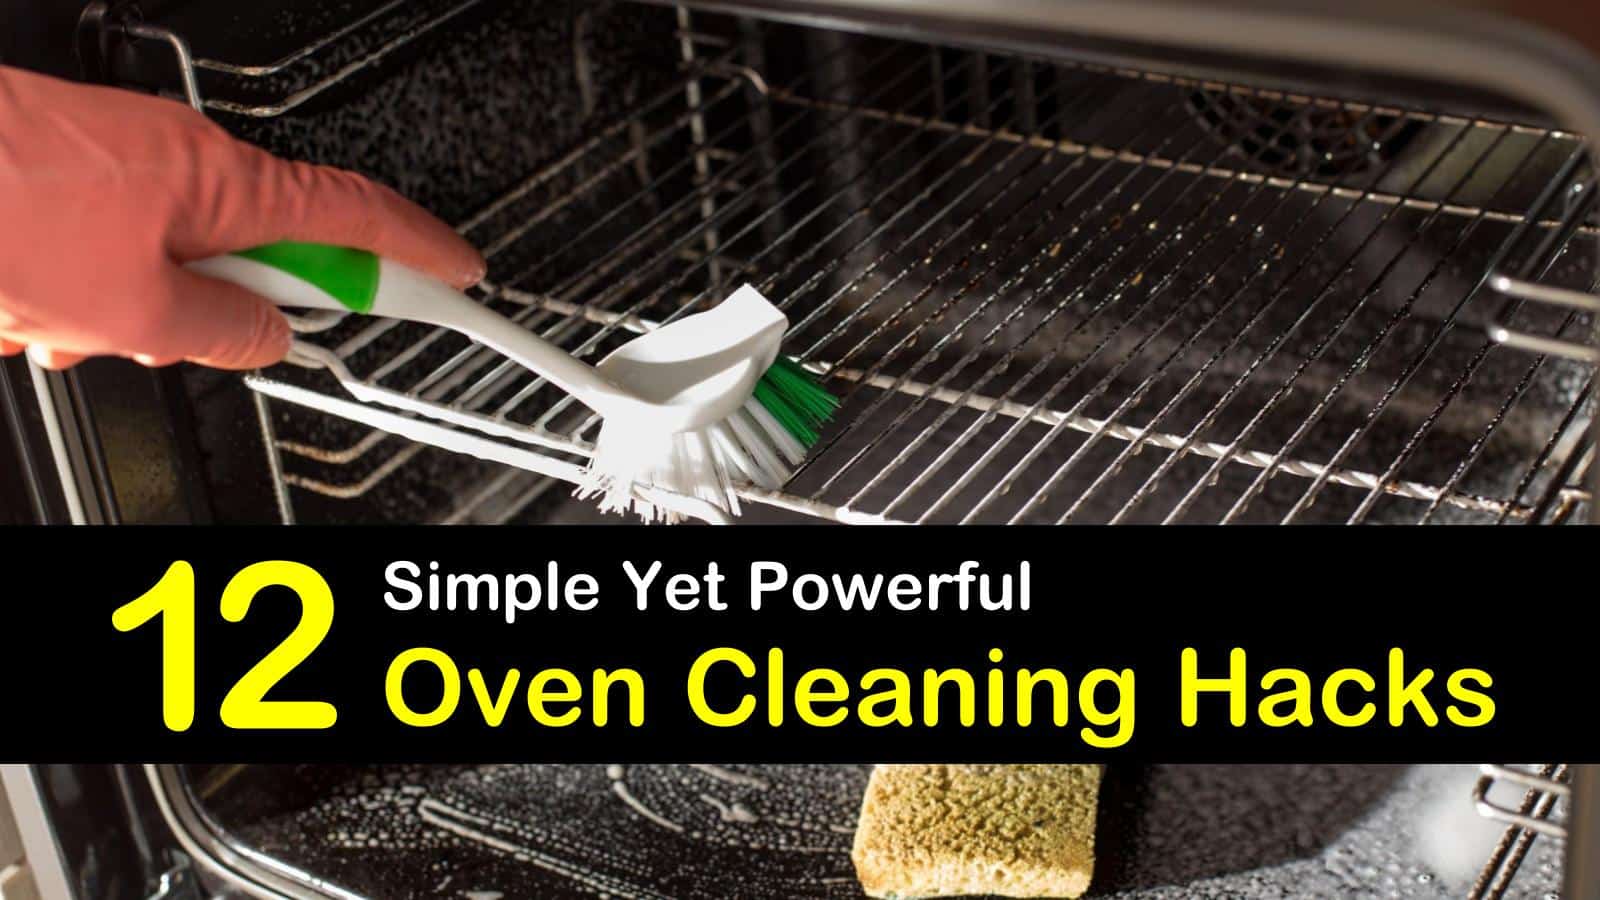 18 Simple Yet Powerful Oven Cleaning Hacks